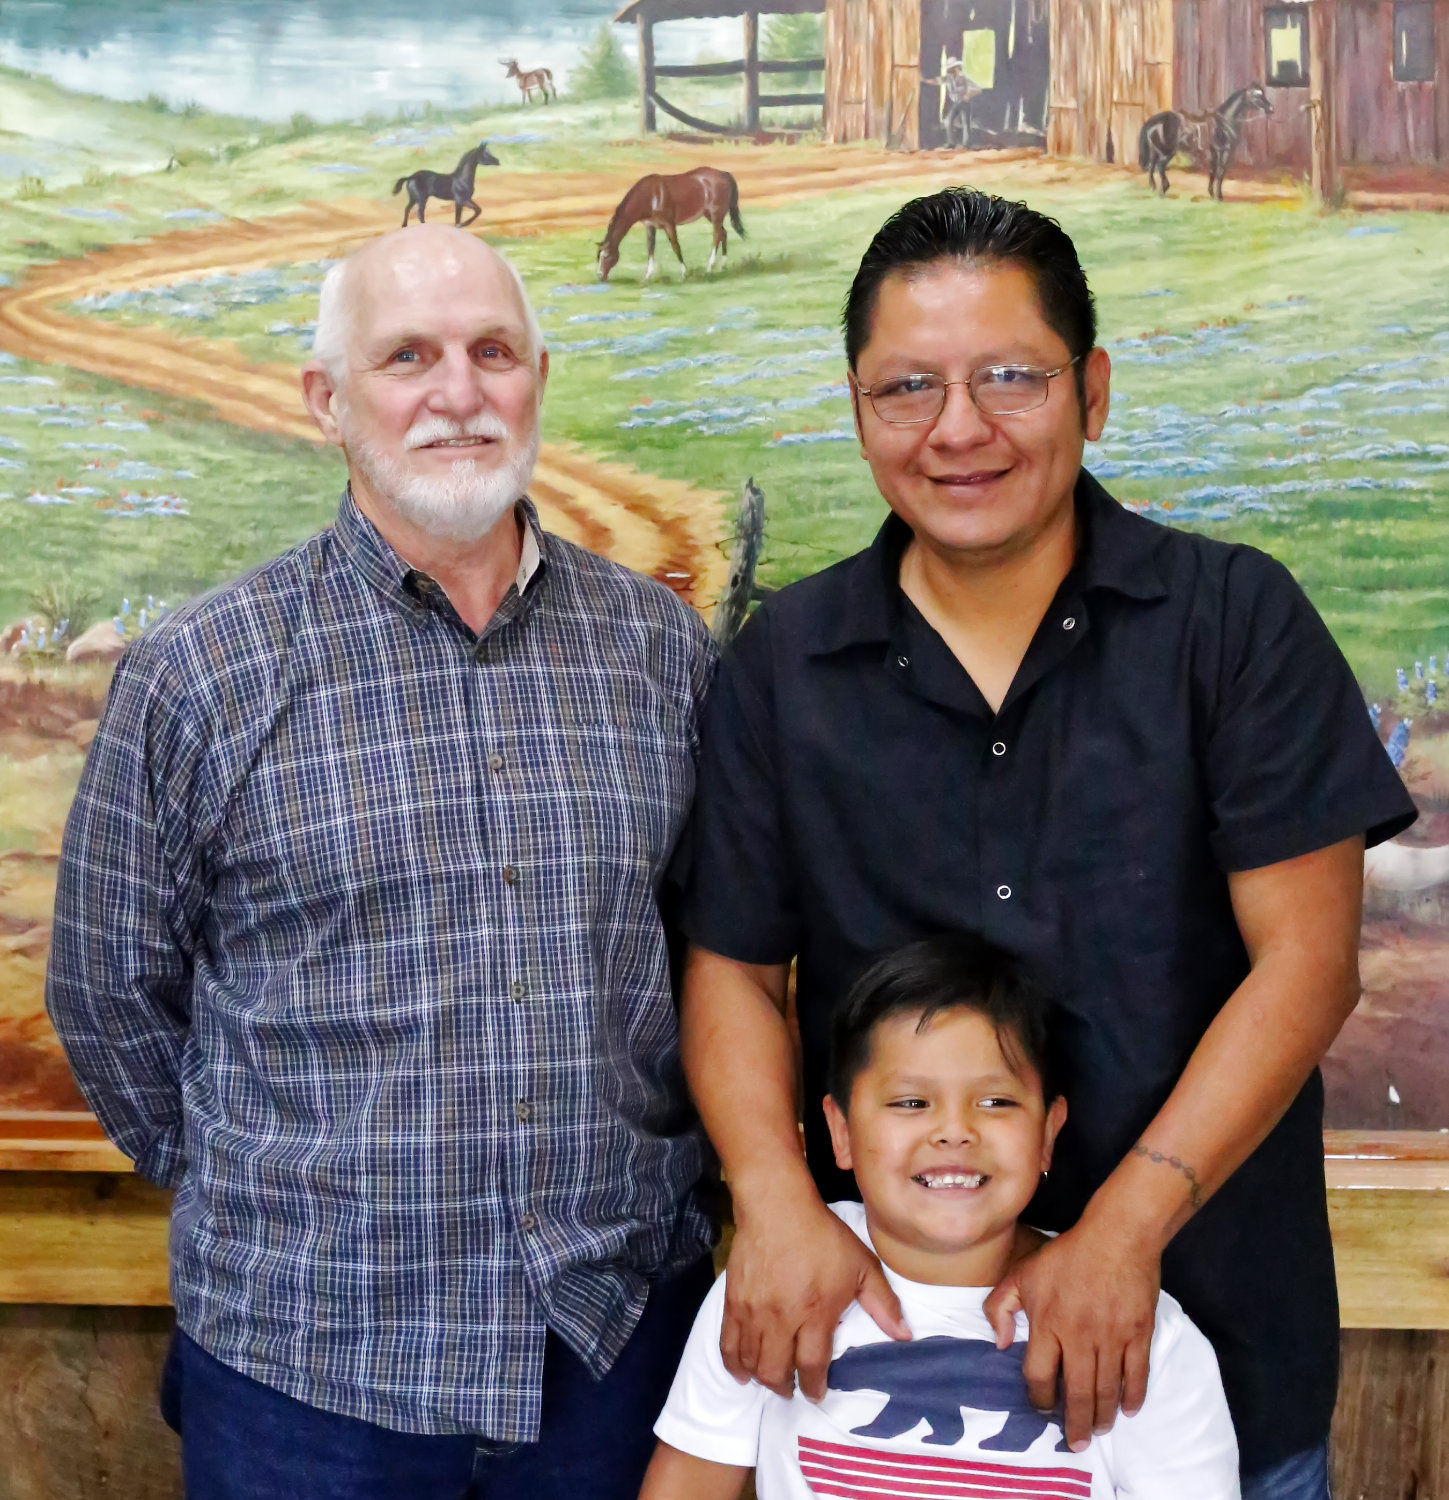 Business partners Ira T. Price and Ricky Perez are joined by Perez’s youngest son, Raeden, at the site of the new Richie’s Grill north of Hawkins.